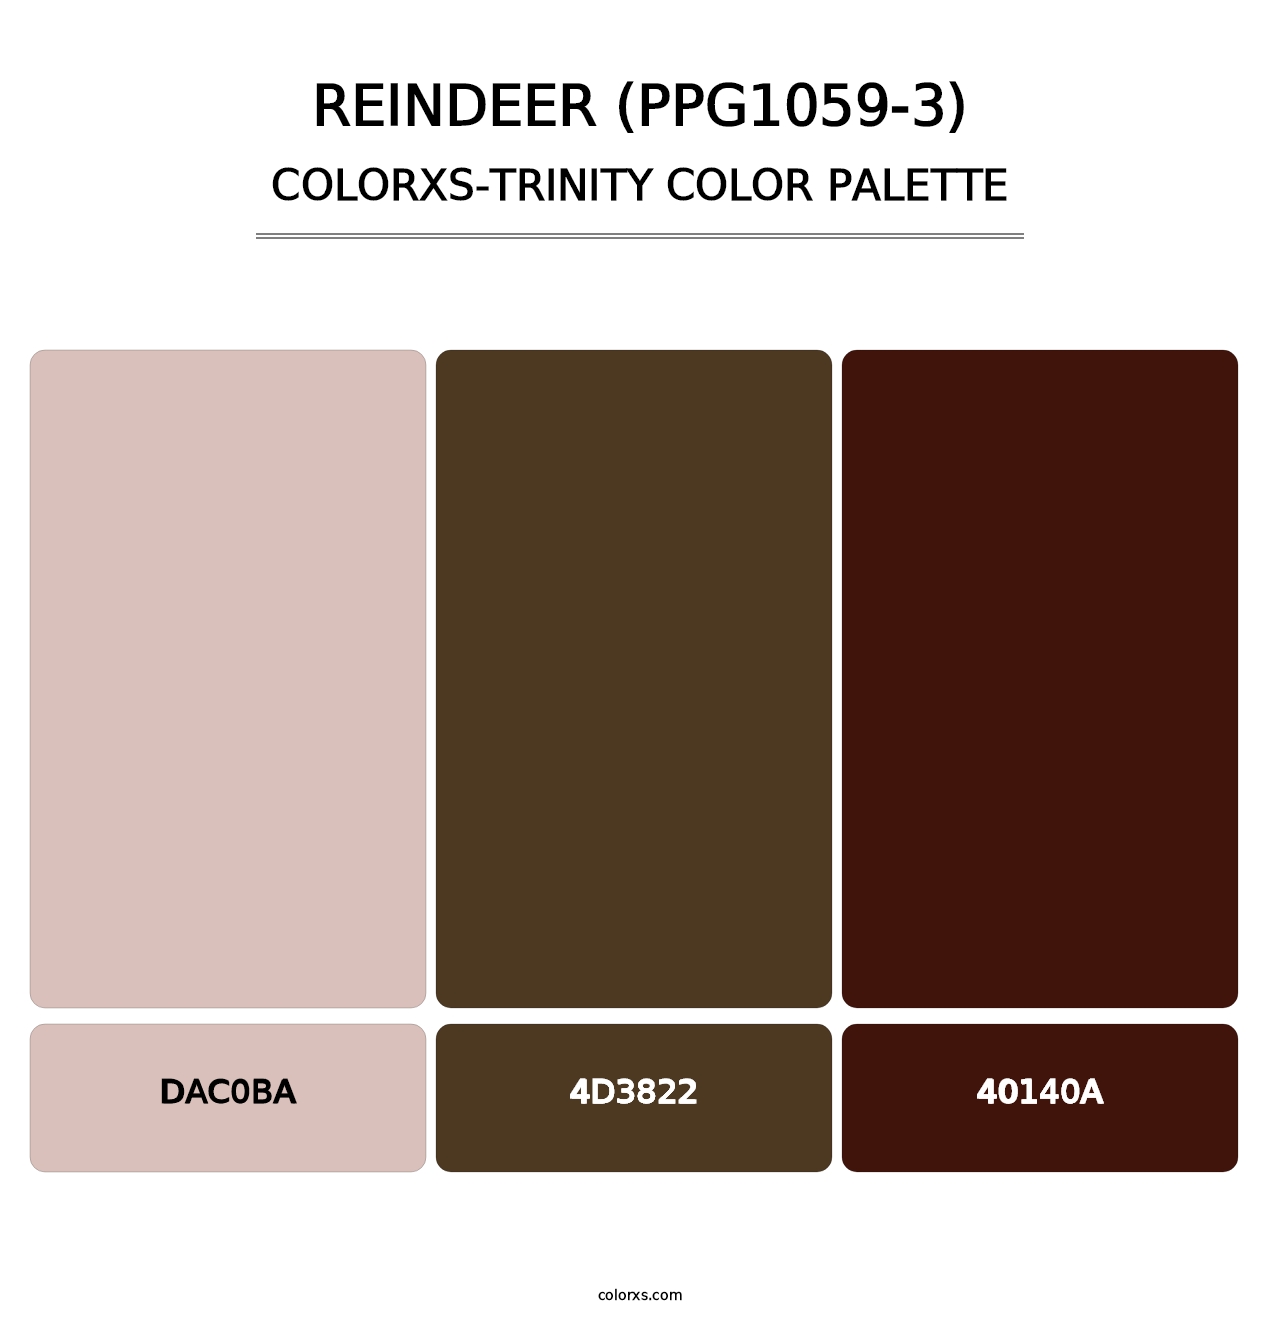 Reindeer (PPG1059-3) - Colorxs Trinity Palette